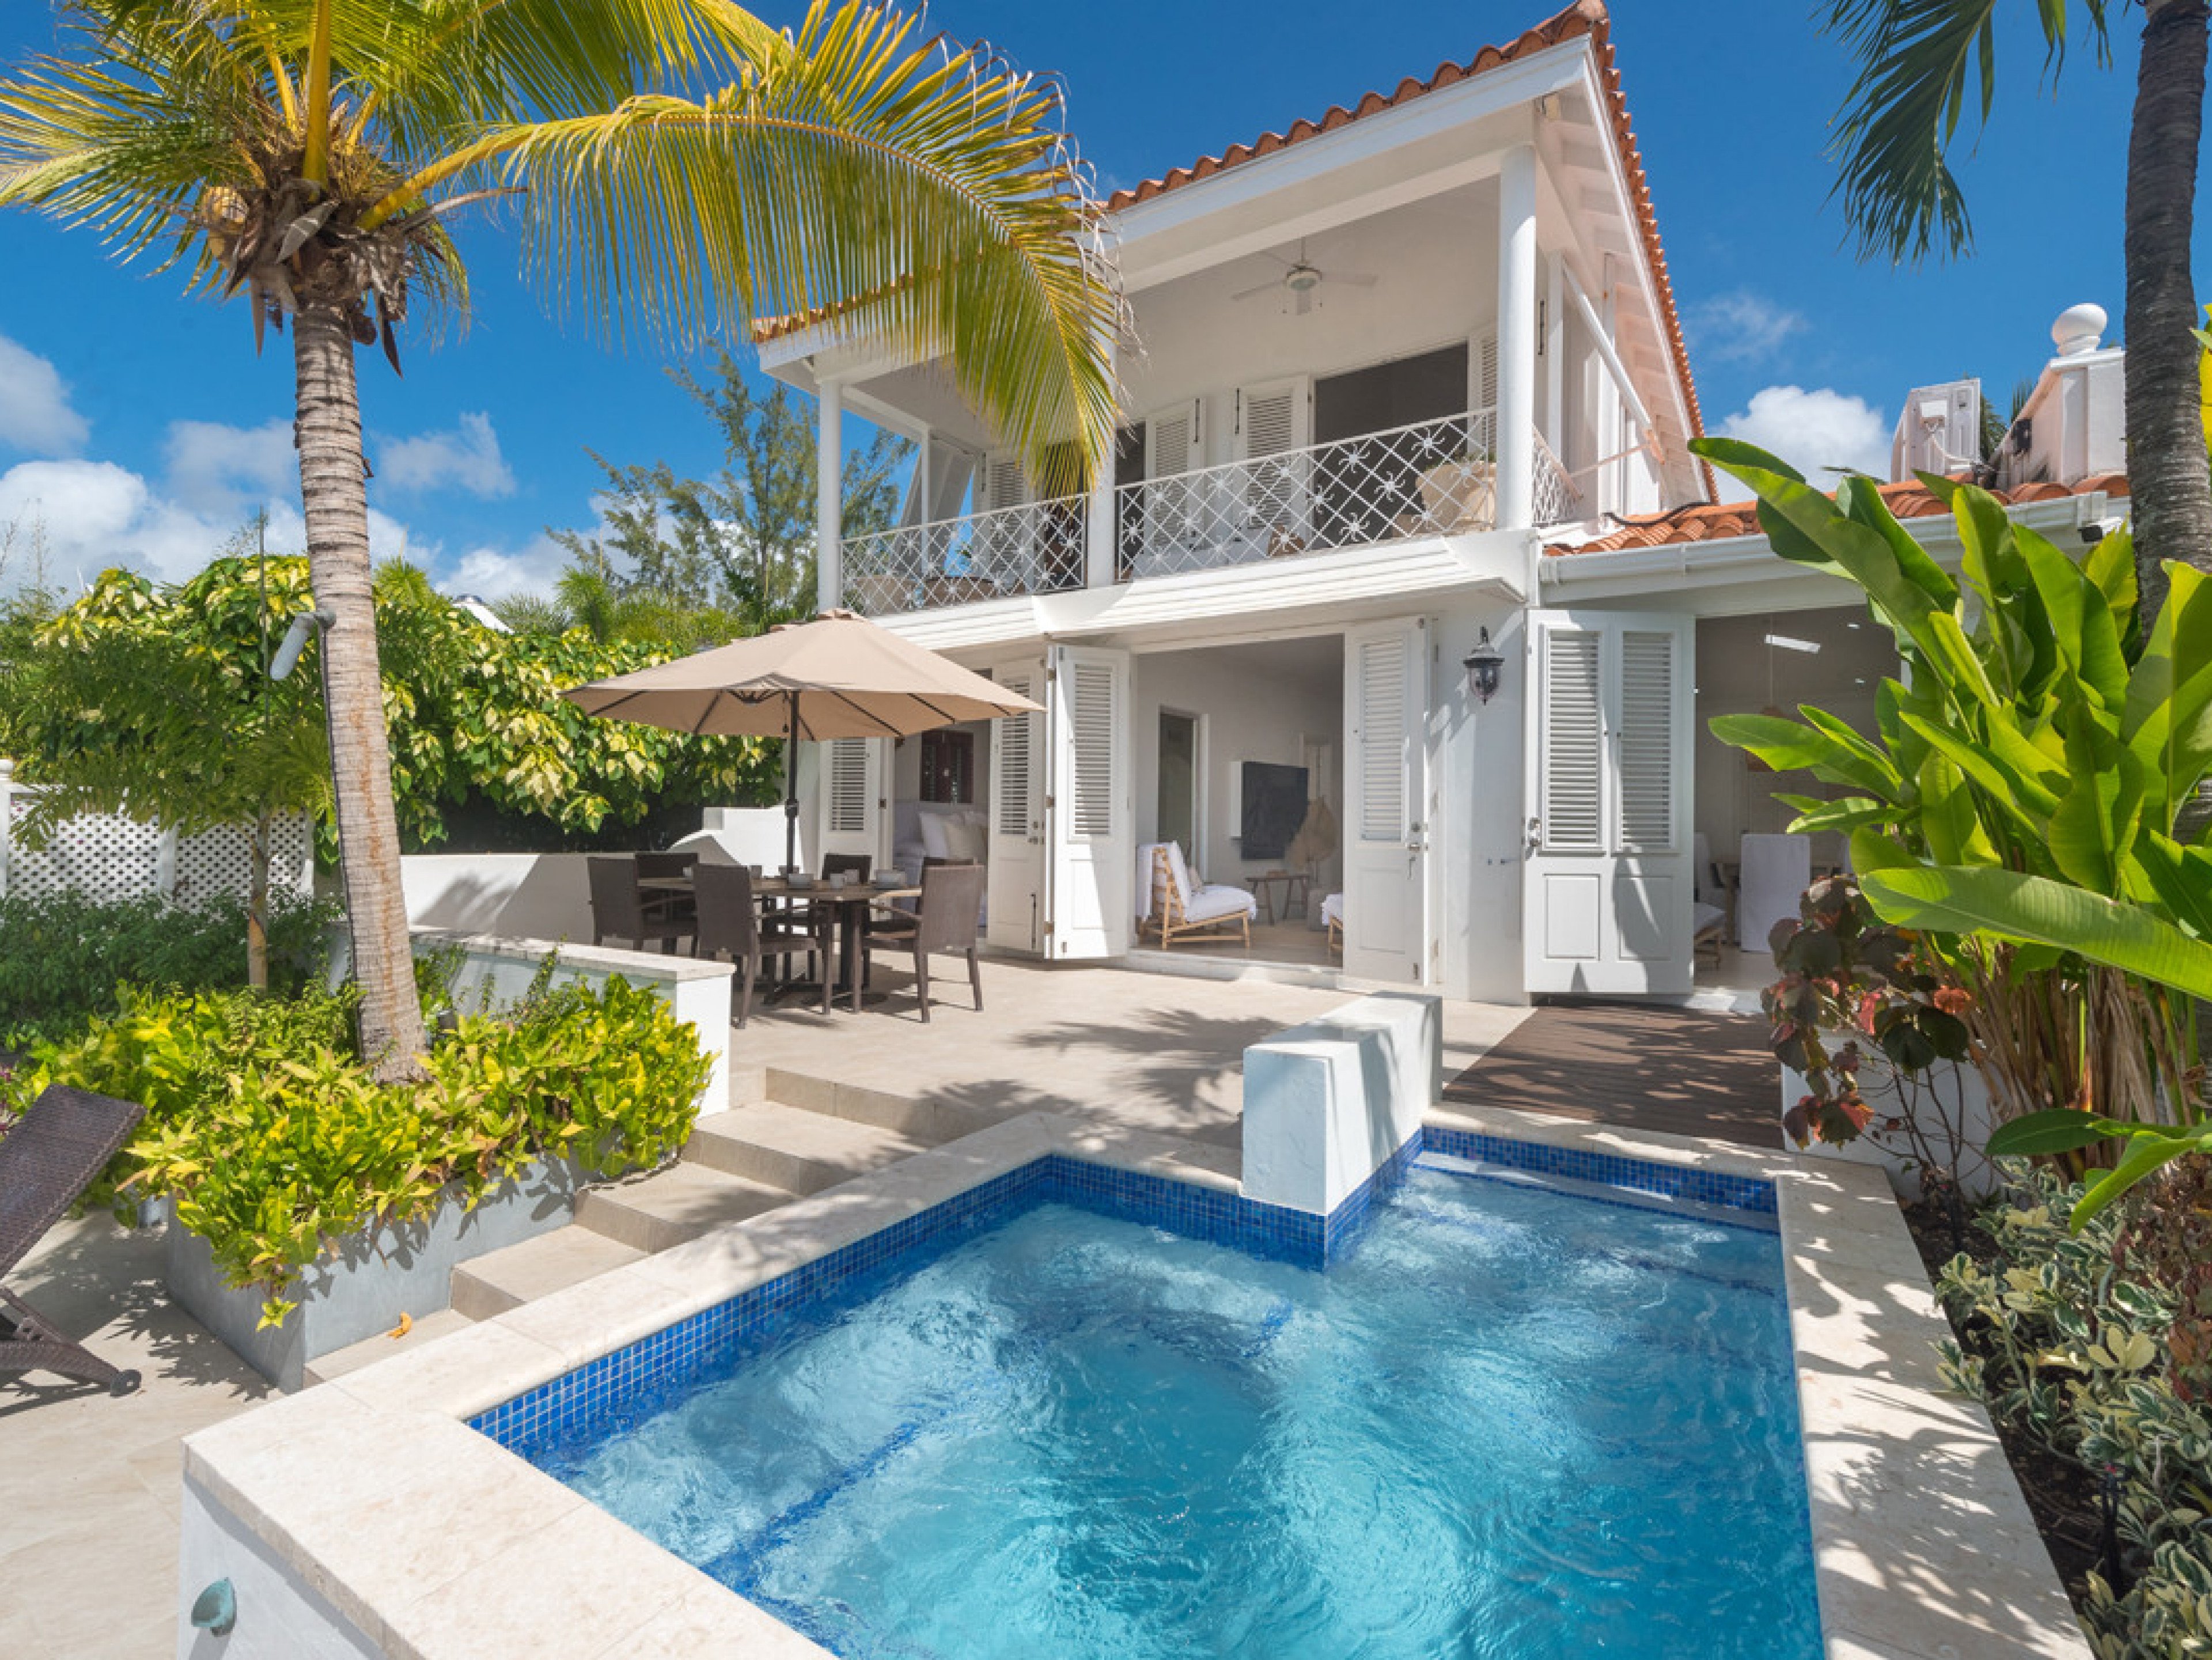 Milord Sunsets St James Vacation Homes